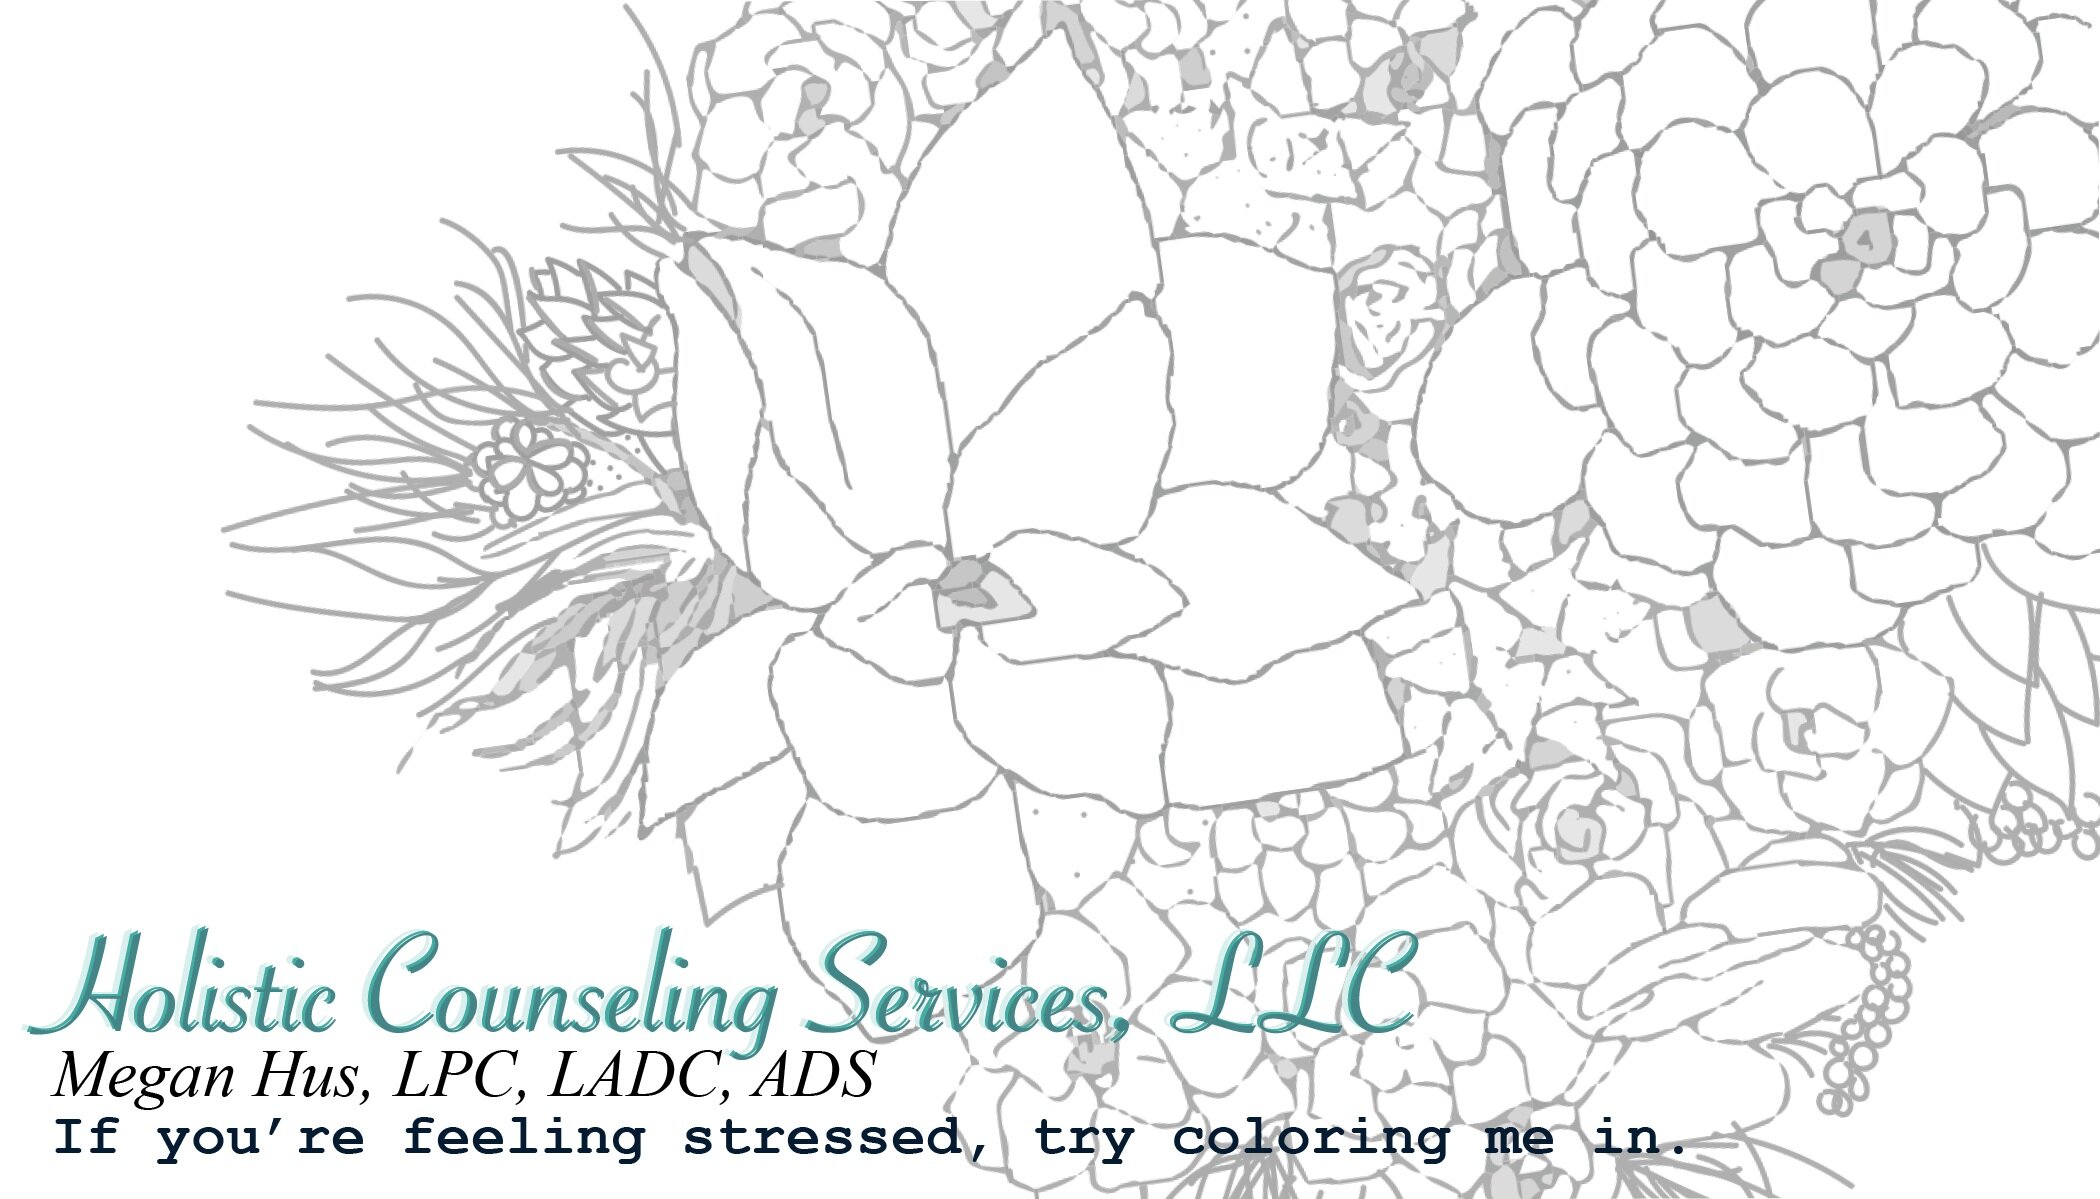 Holistic Counseling Services, LLC